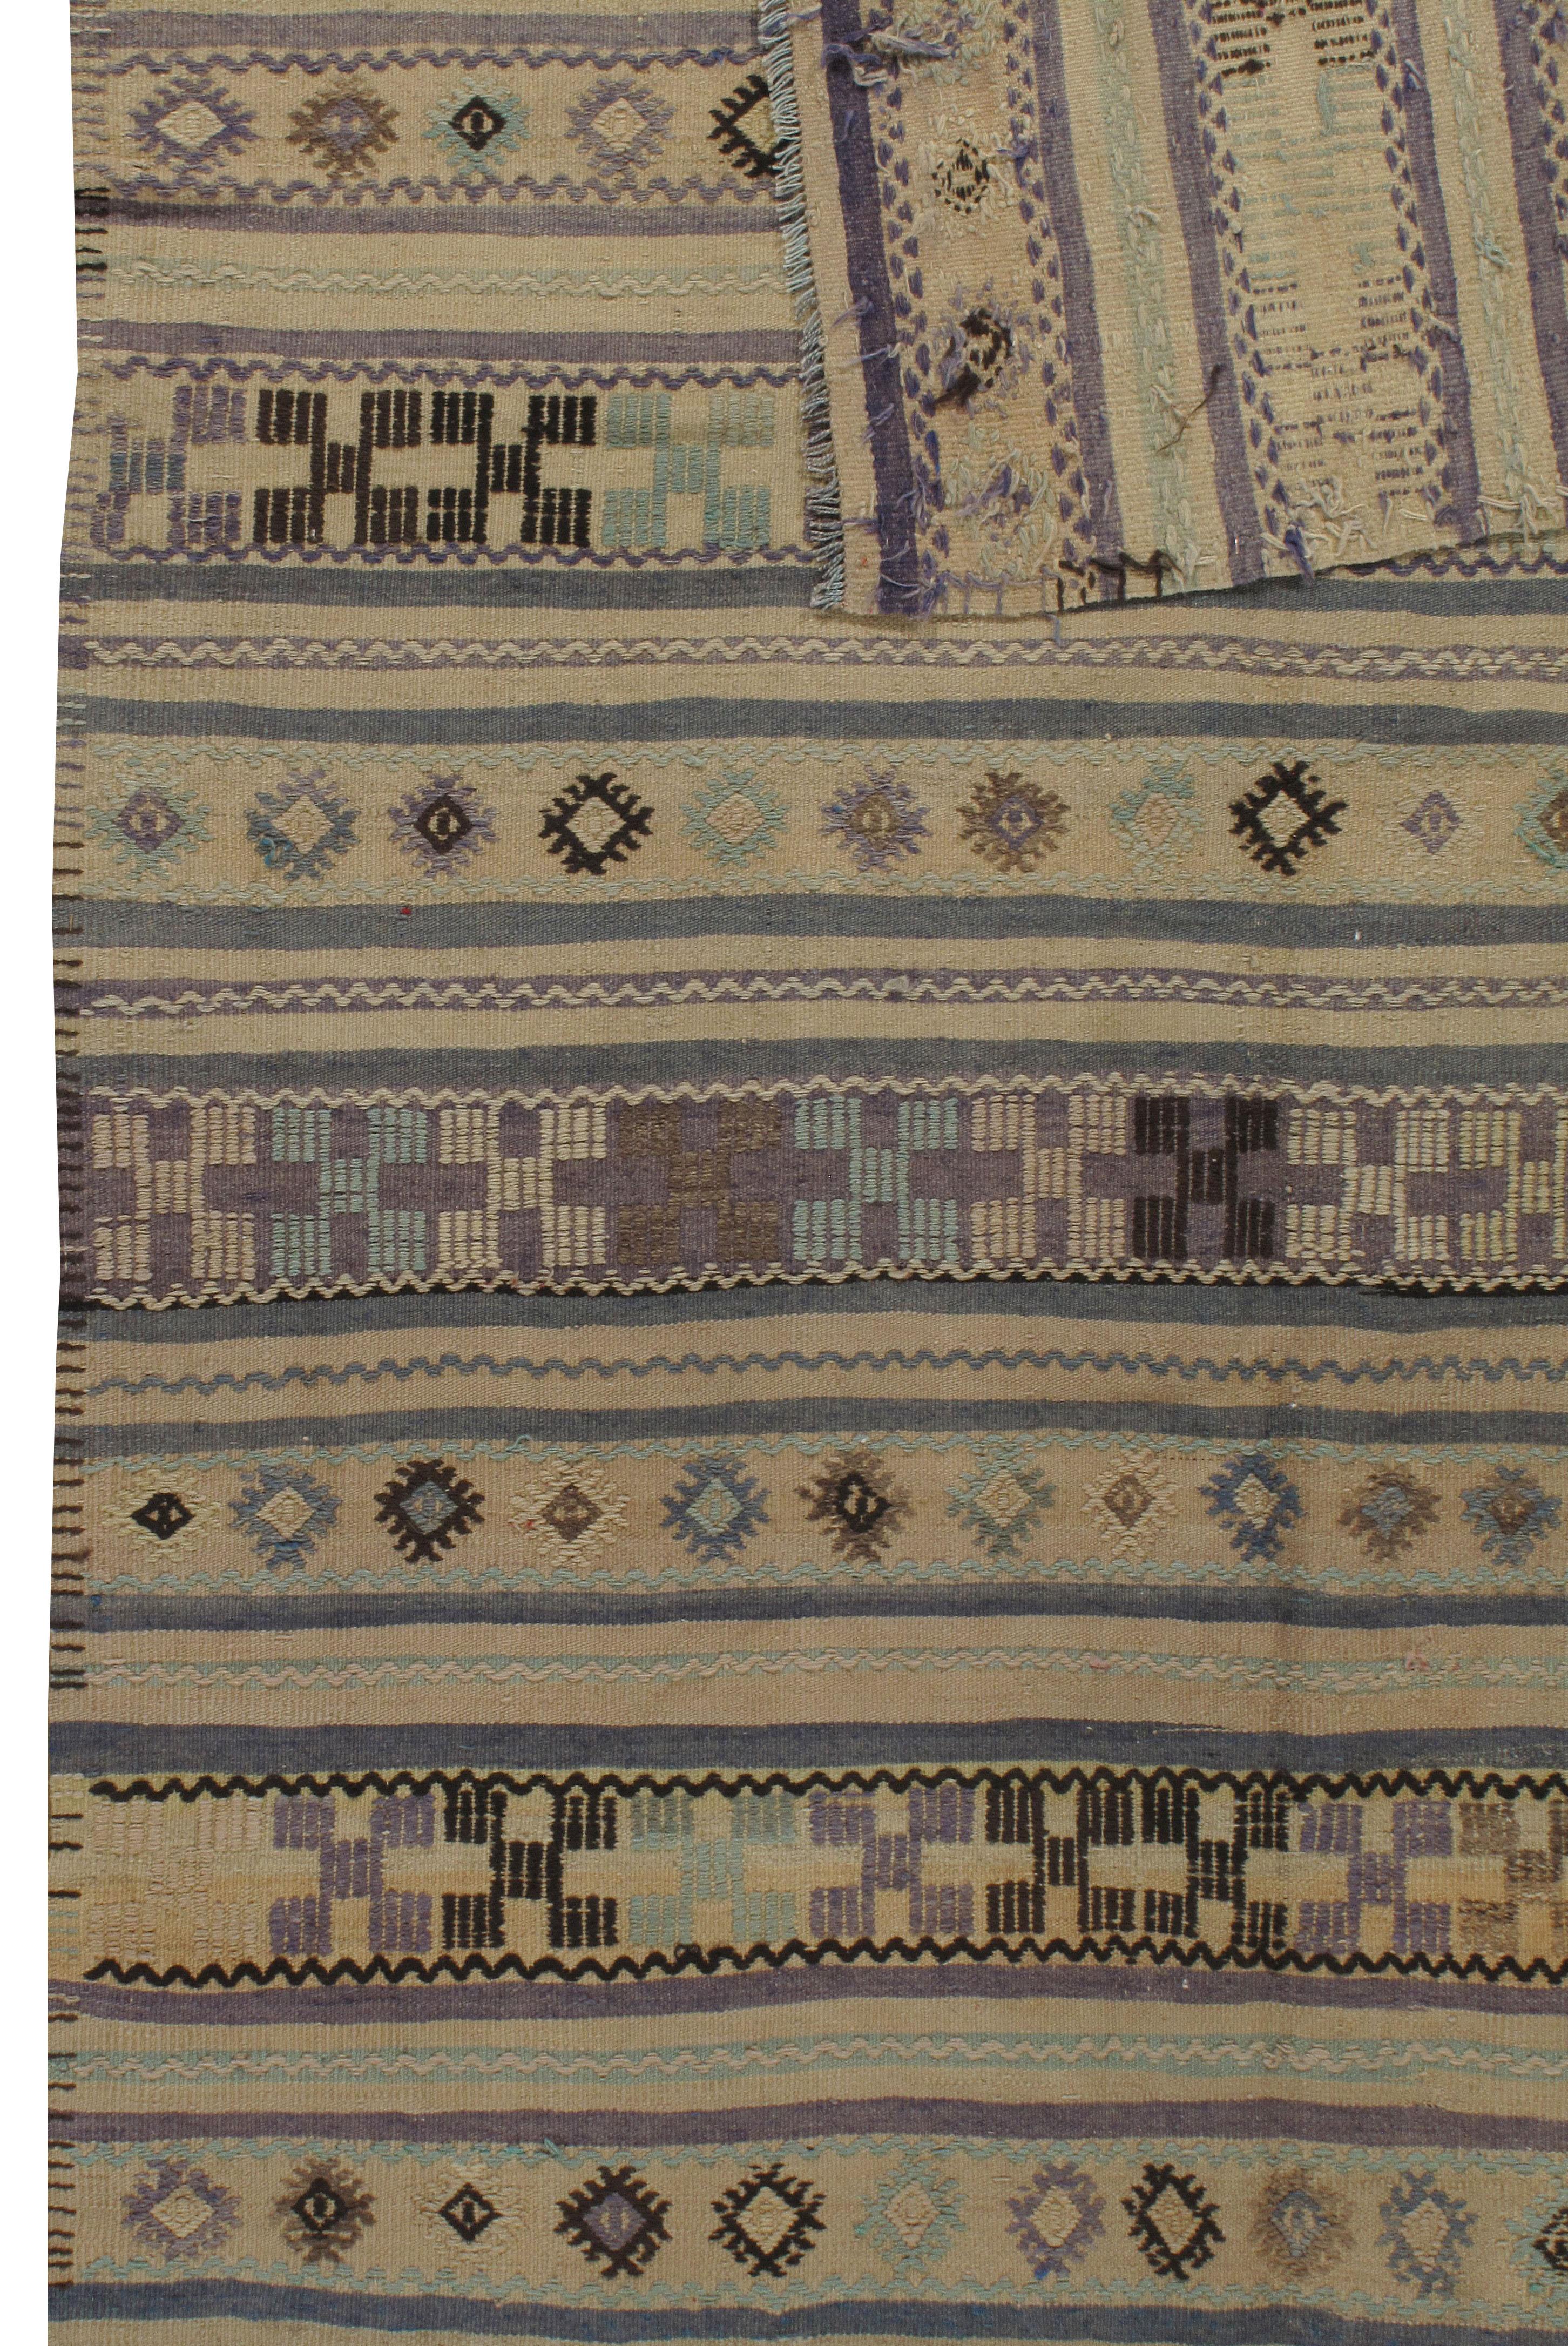 Vintage Turkish flat-weave Jajim Kilim rug. Size: 5'1 x 7'8. The Jajim (cecim) technique is followed in Turkey, Persia and the Caucasus and consists of a plain weave (equal warps and wefts) ground with an added (supplementary) weft pattern. The